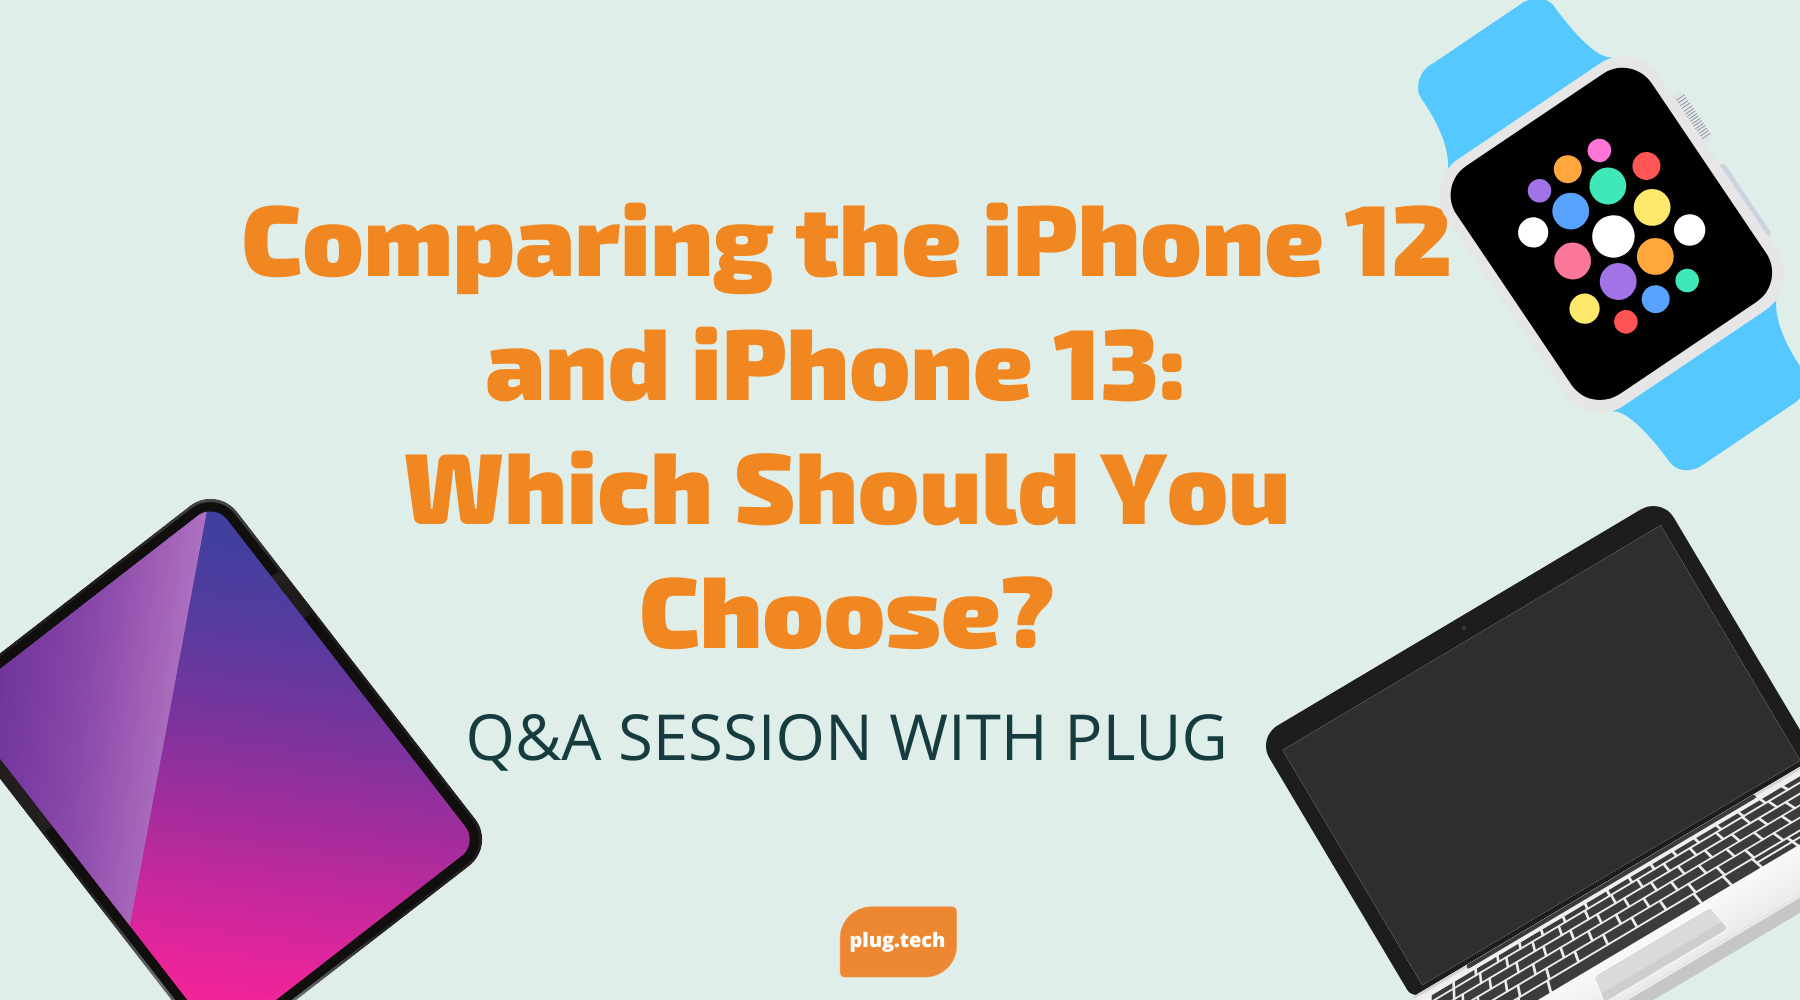 Comparing the iPhone 12 and iPhone 13: Which Should You Choose?